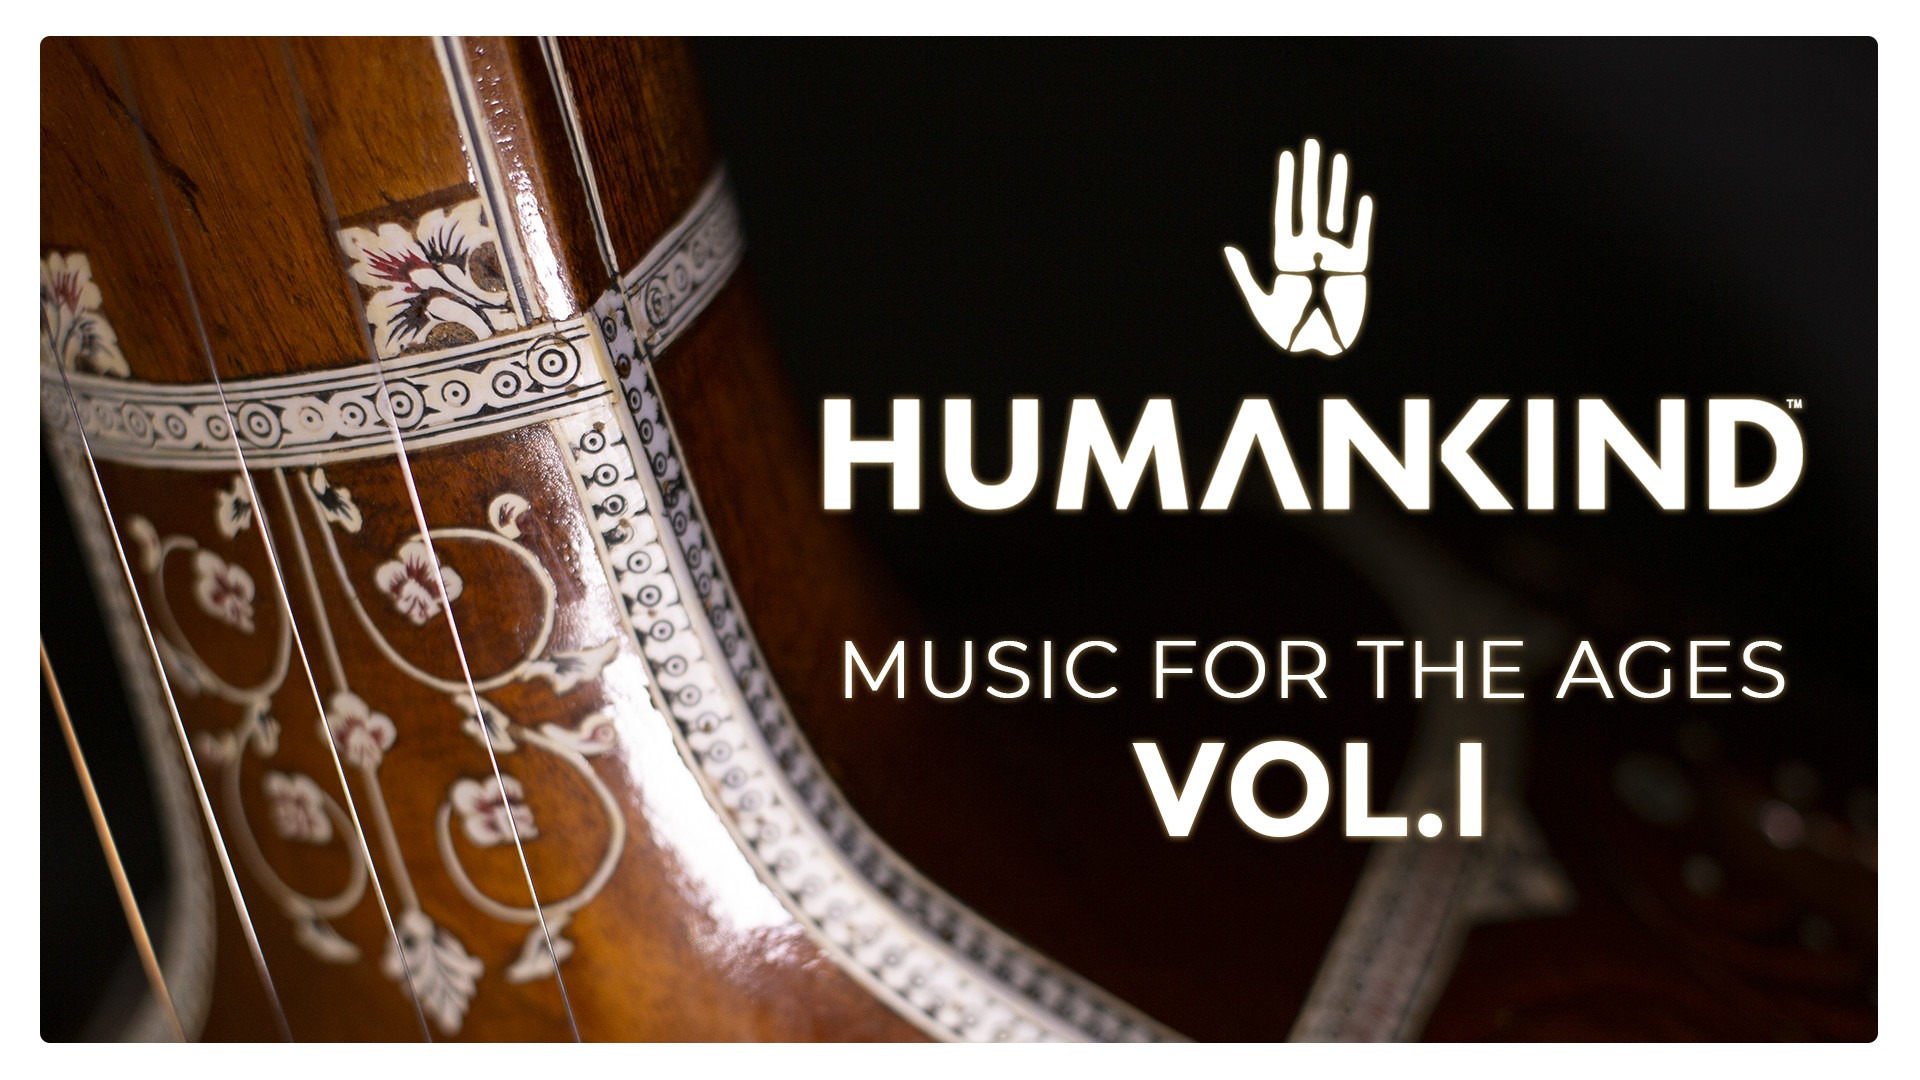 HUMANKIND™ - Music for the Ages, Vol. I Featured Screenshot #1